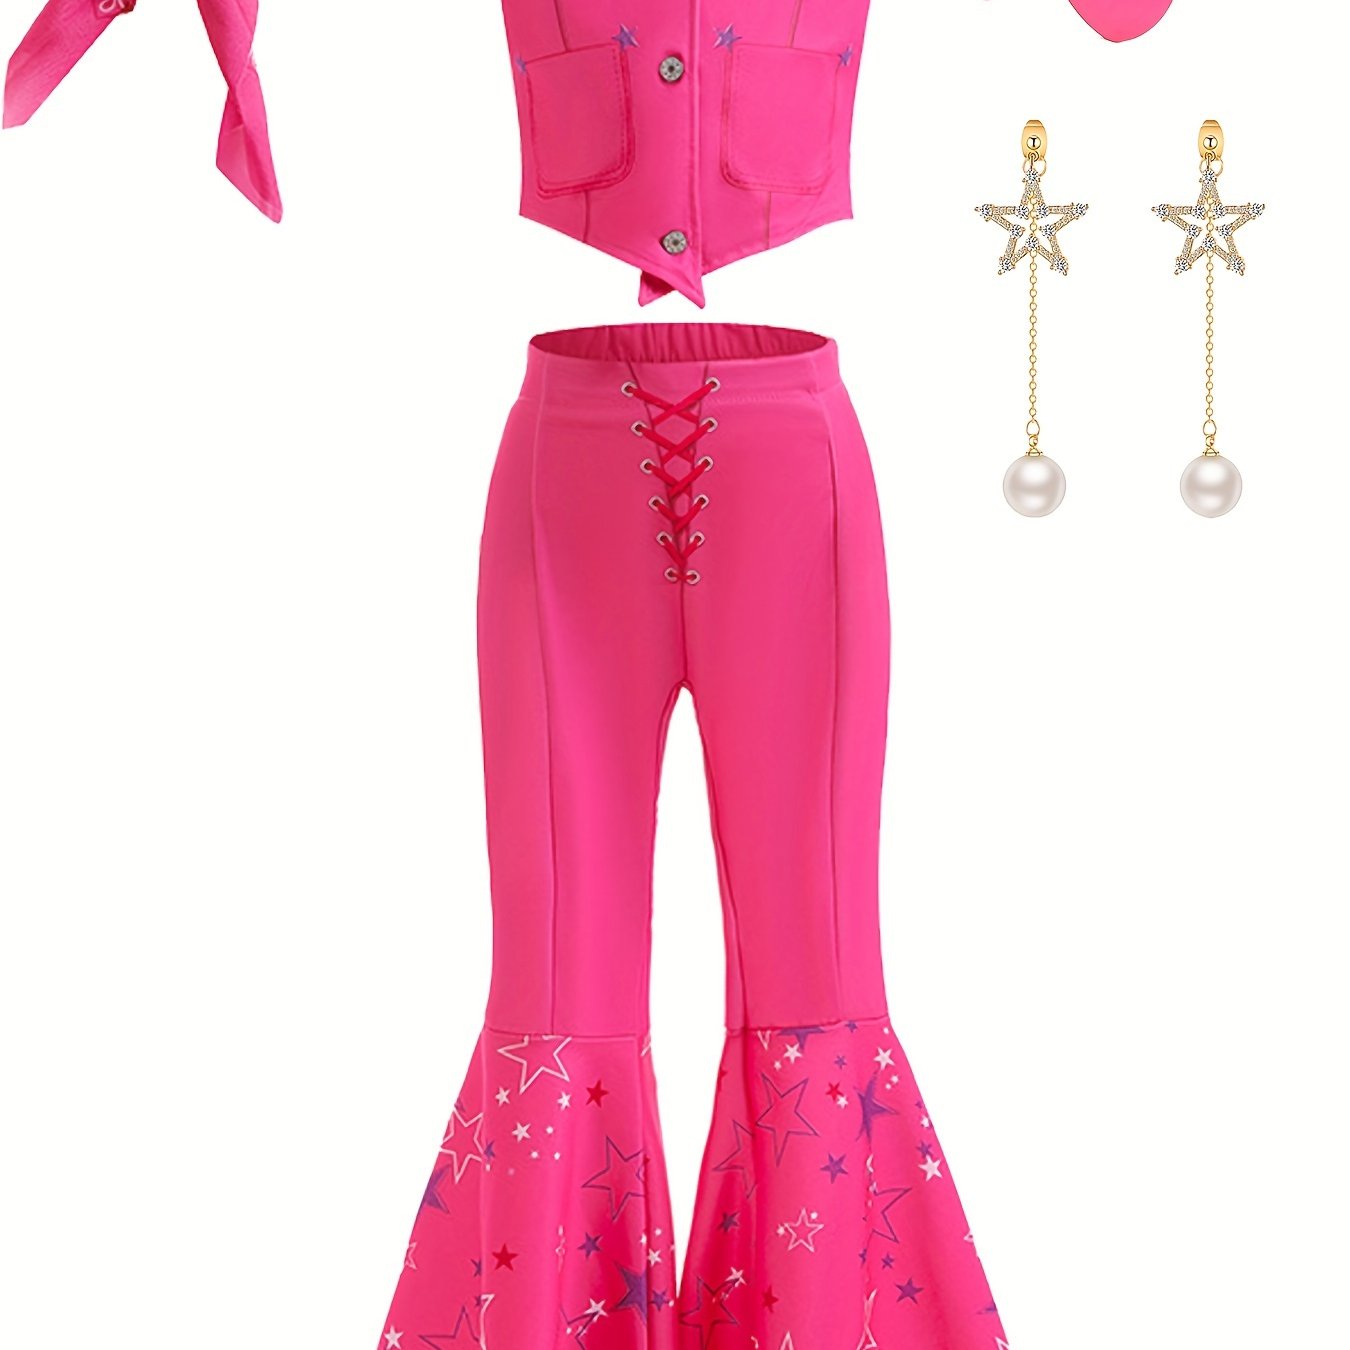 5pcs cowgirl cosplay costume set sleeveless top flare pants scarf earrings sunglasses set for christmas carnival mardi party gift